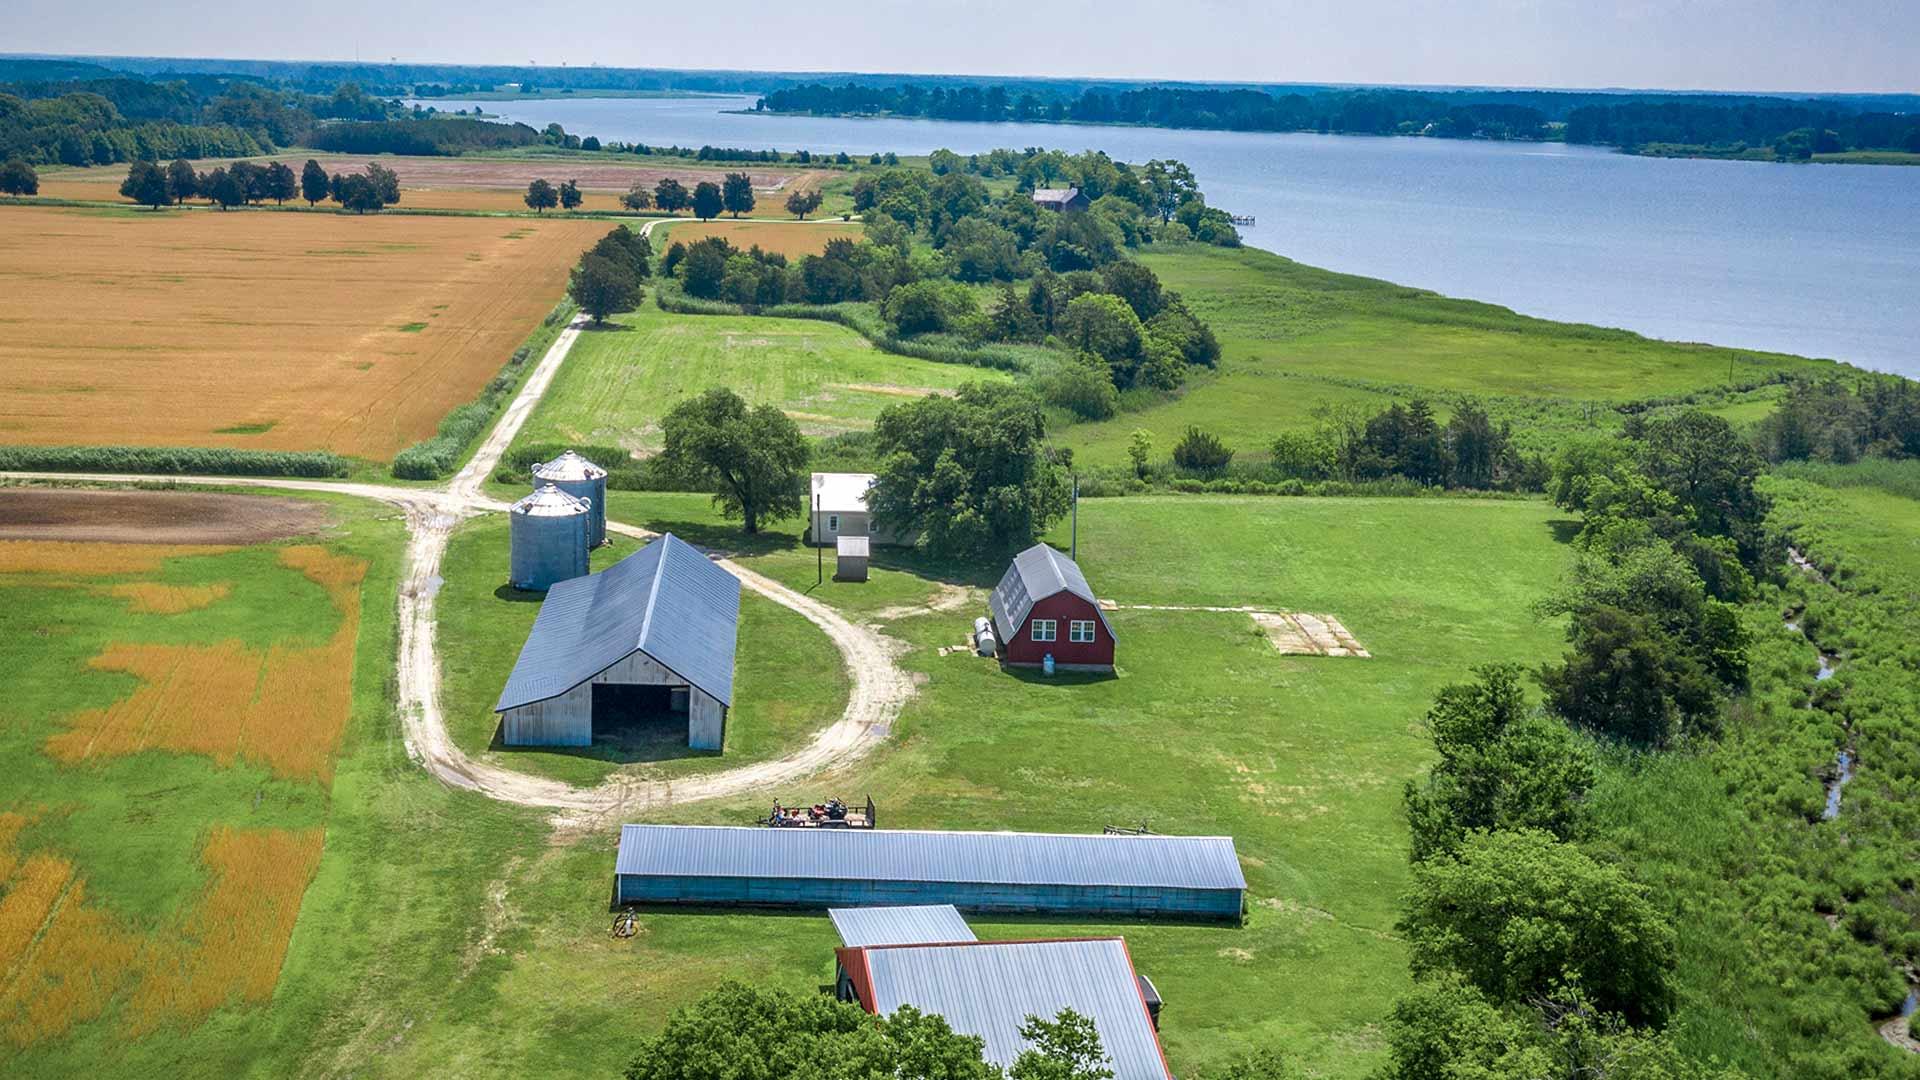 Arial view of Eastern Shore farm buildings and land along a river